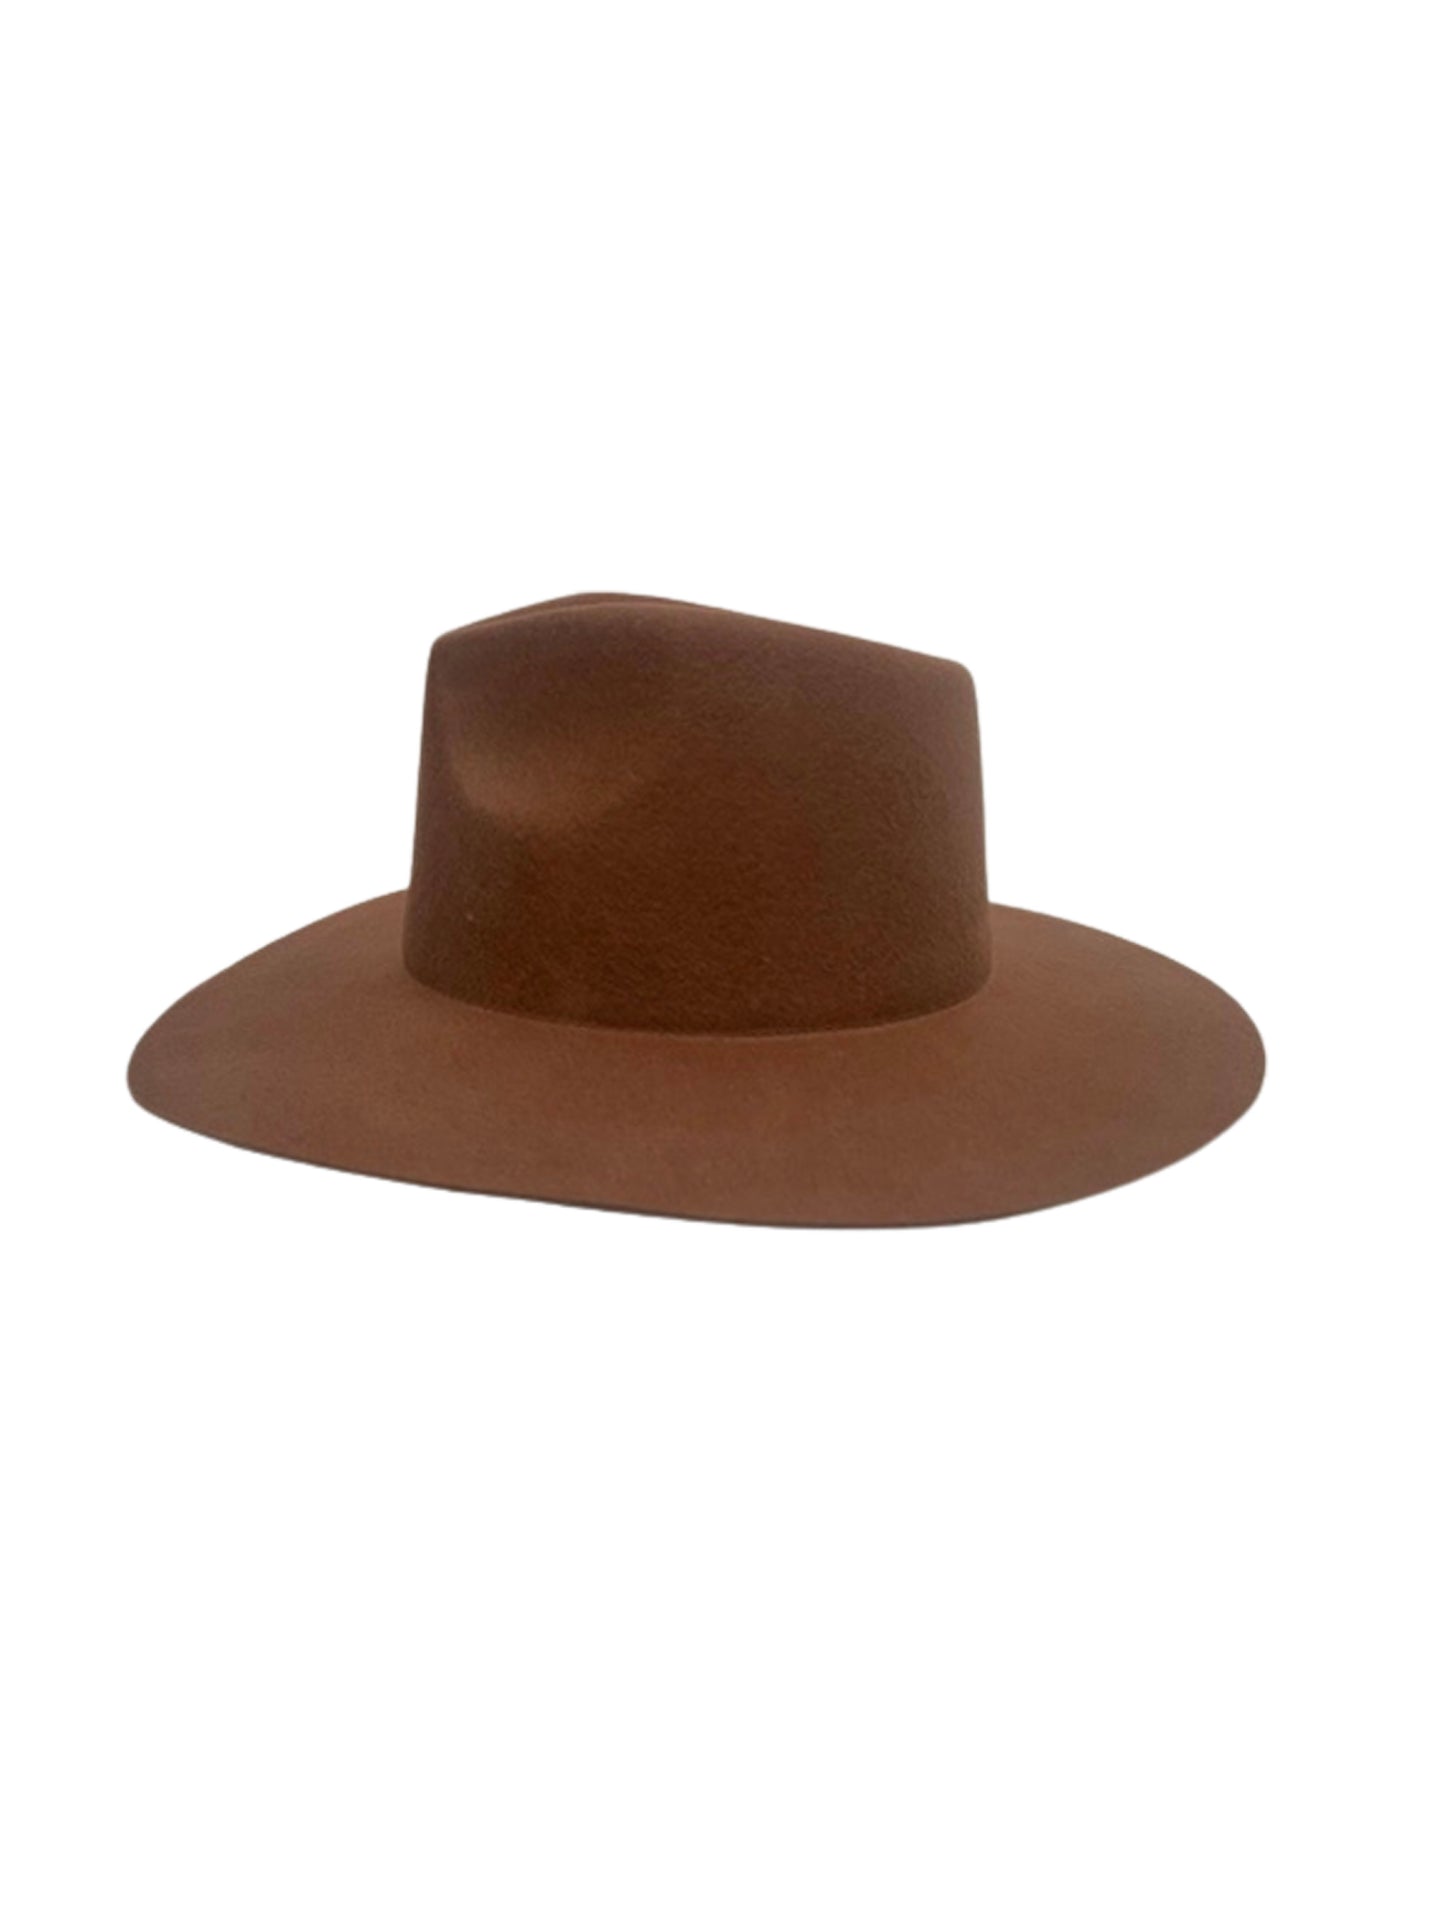 rancher hat chocolate side